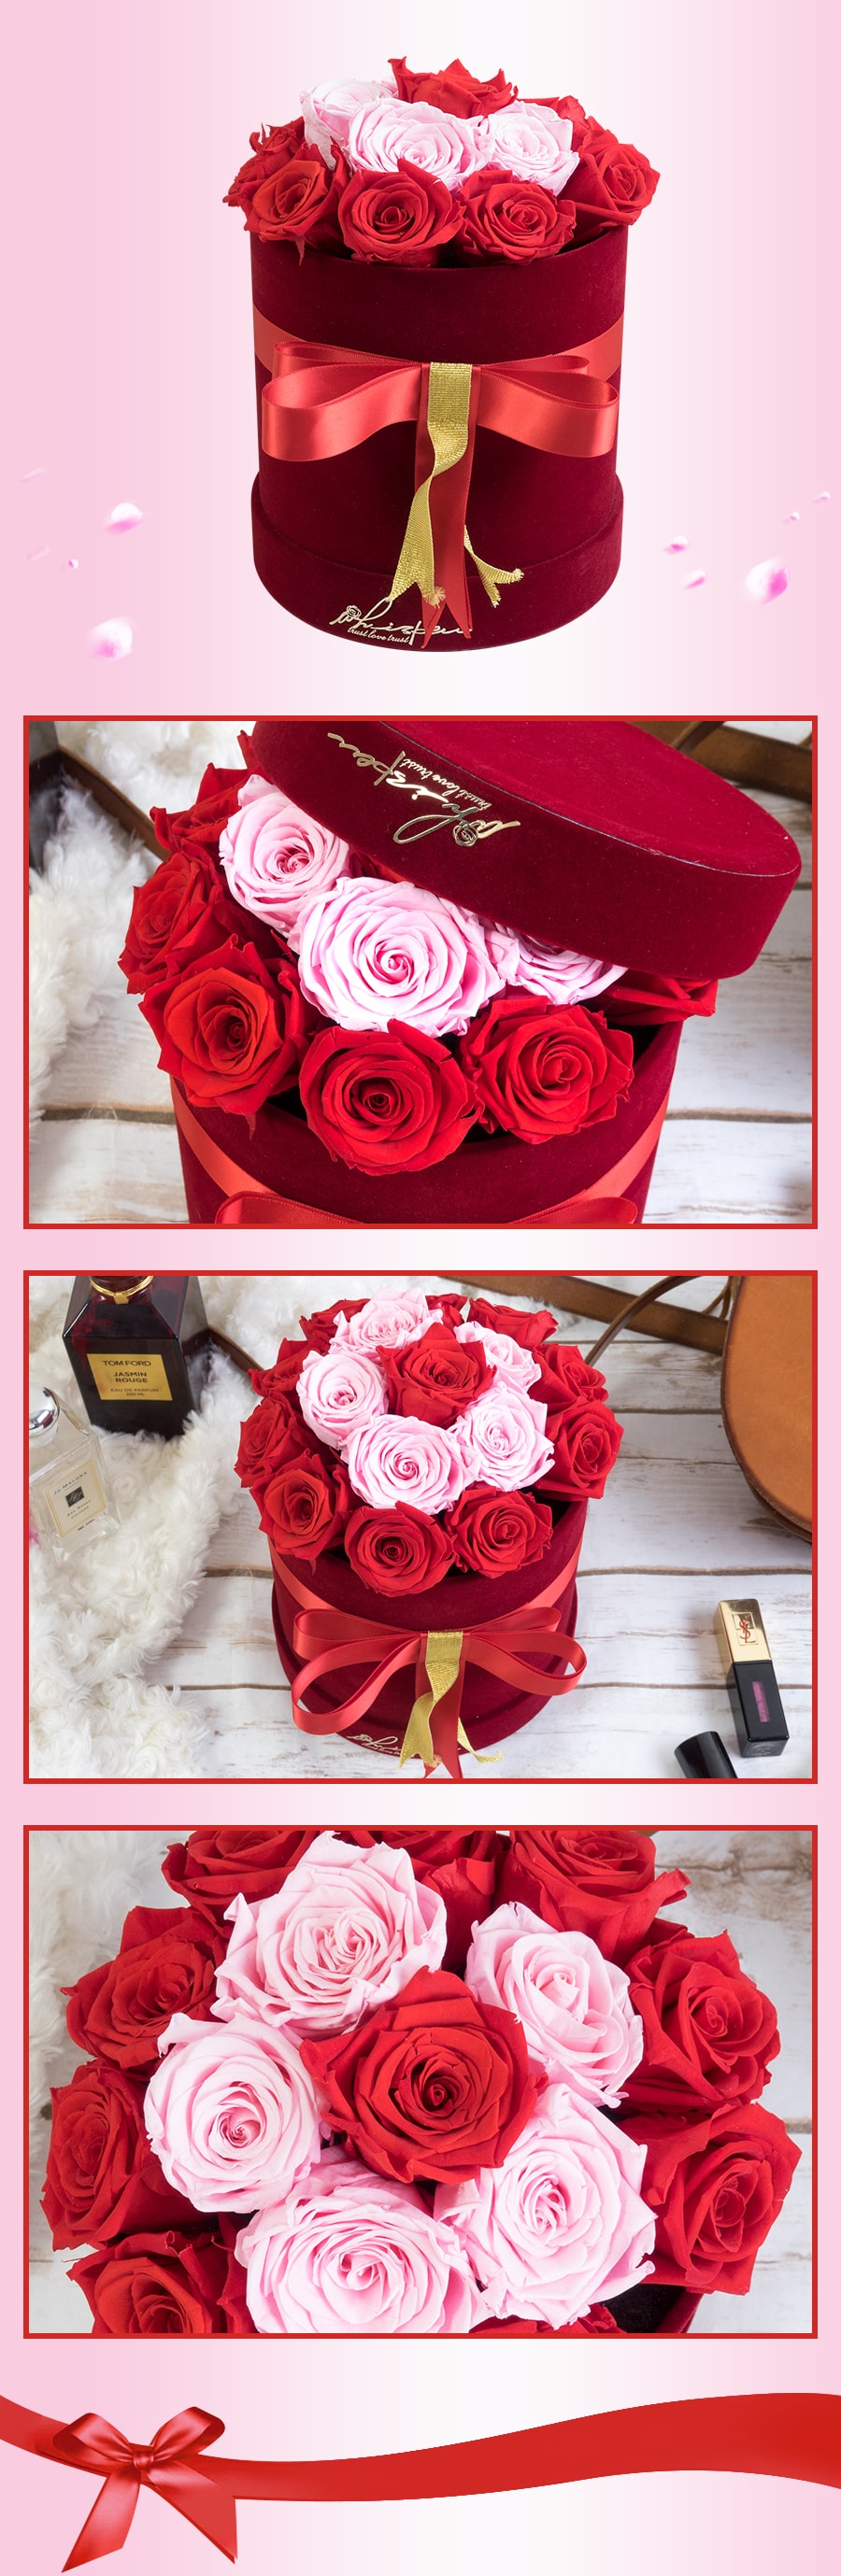 whisper bouquet preserved roses Red wine round box (red roses&pink roses)